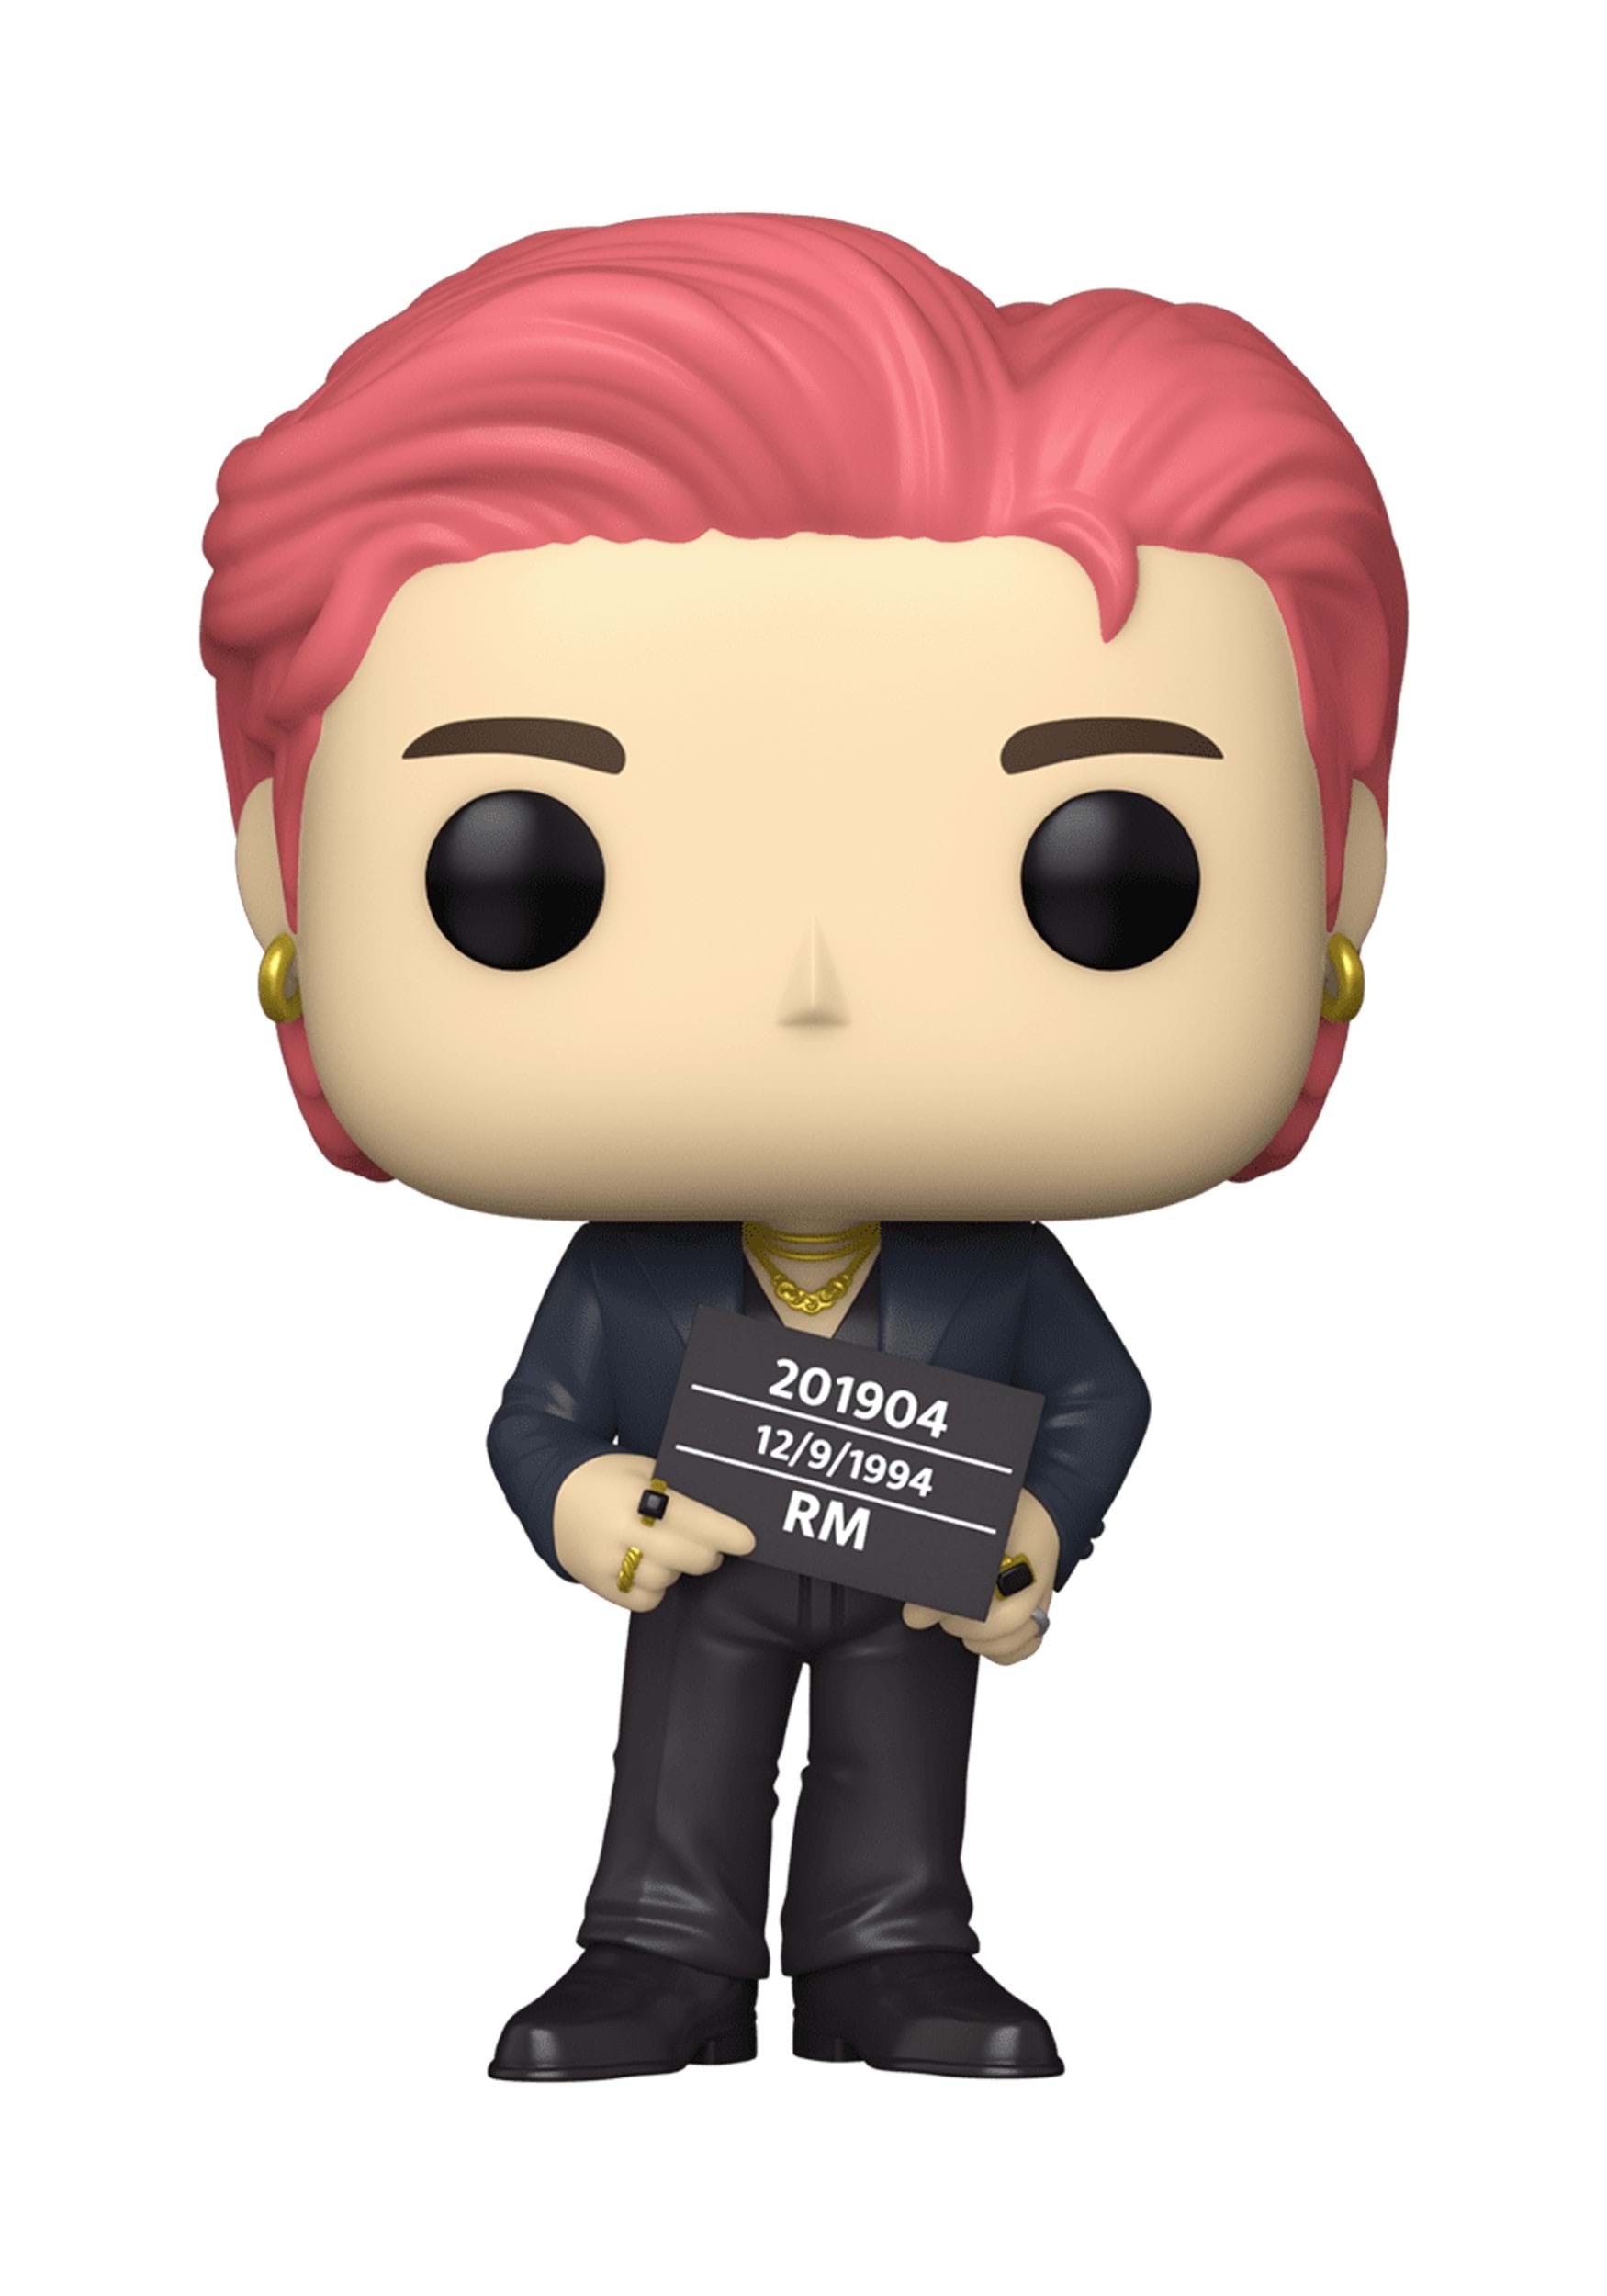 BTS Funko Pops On Sale: Where to Buy